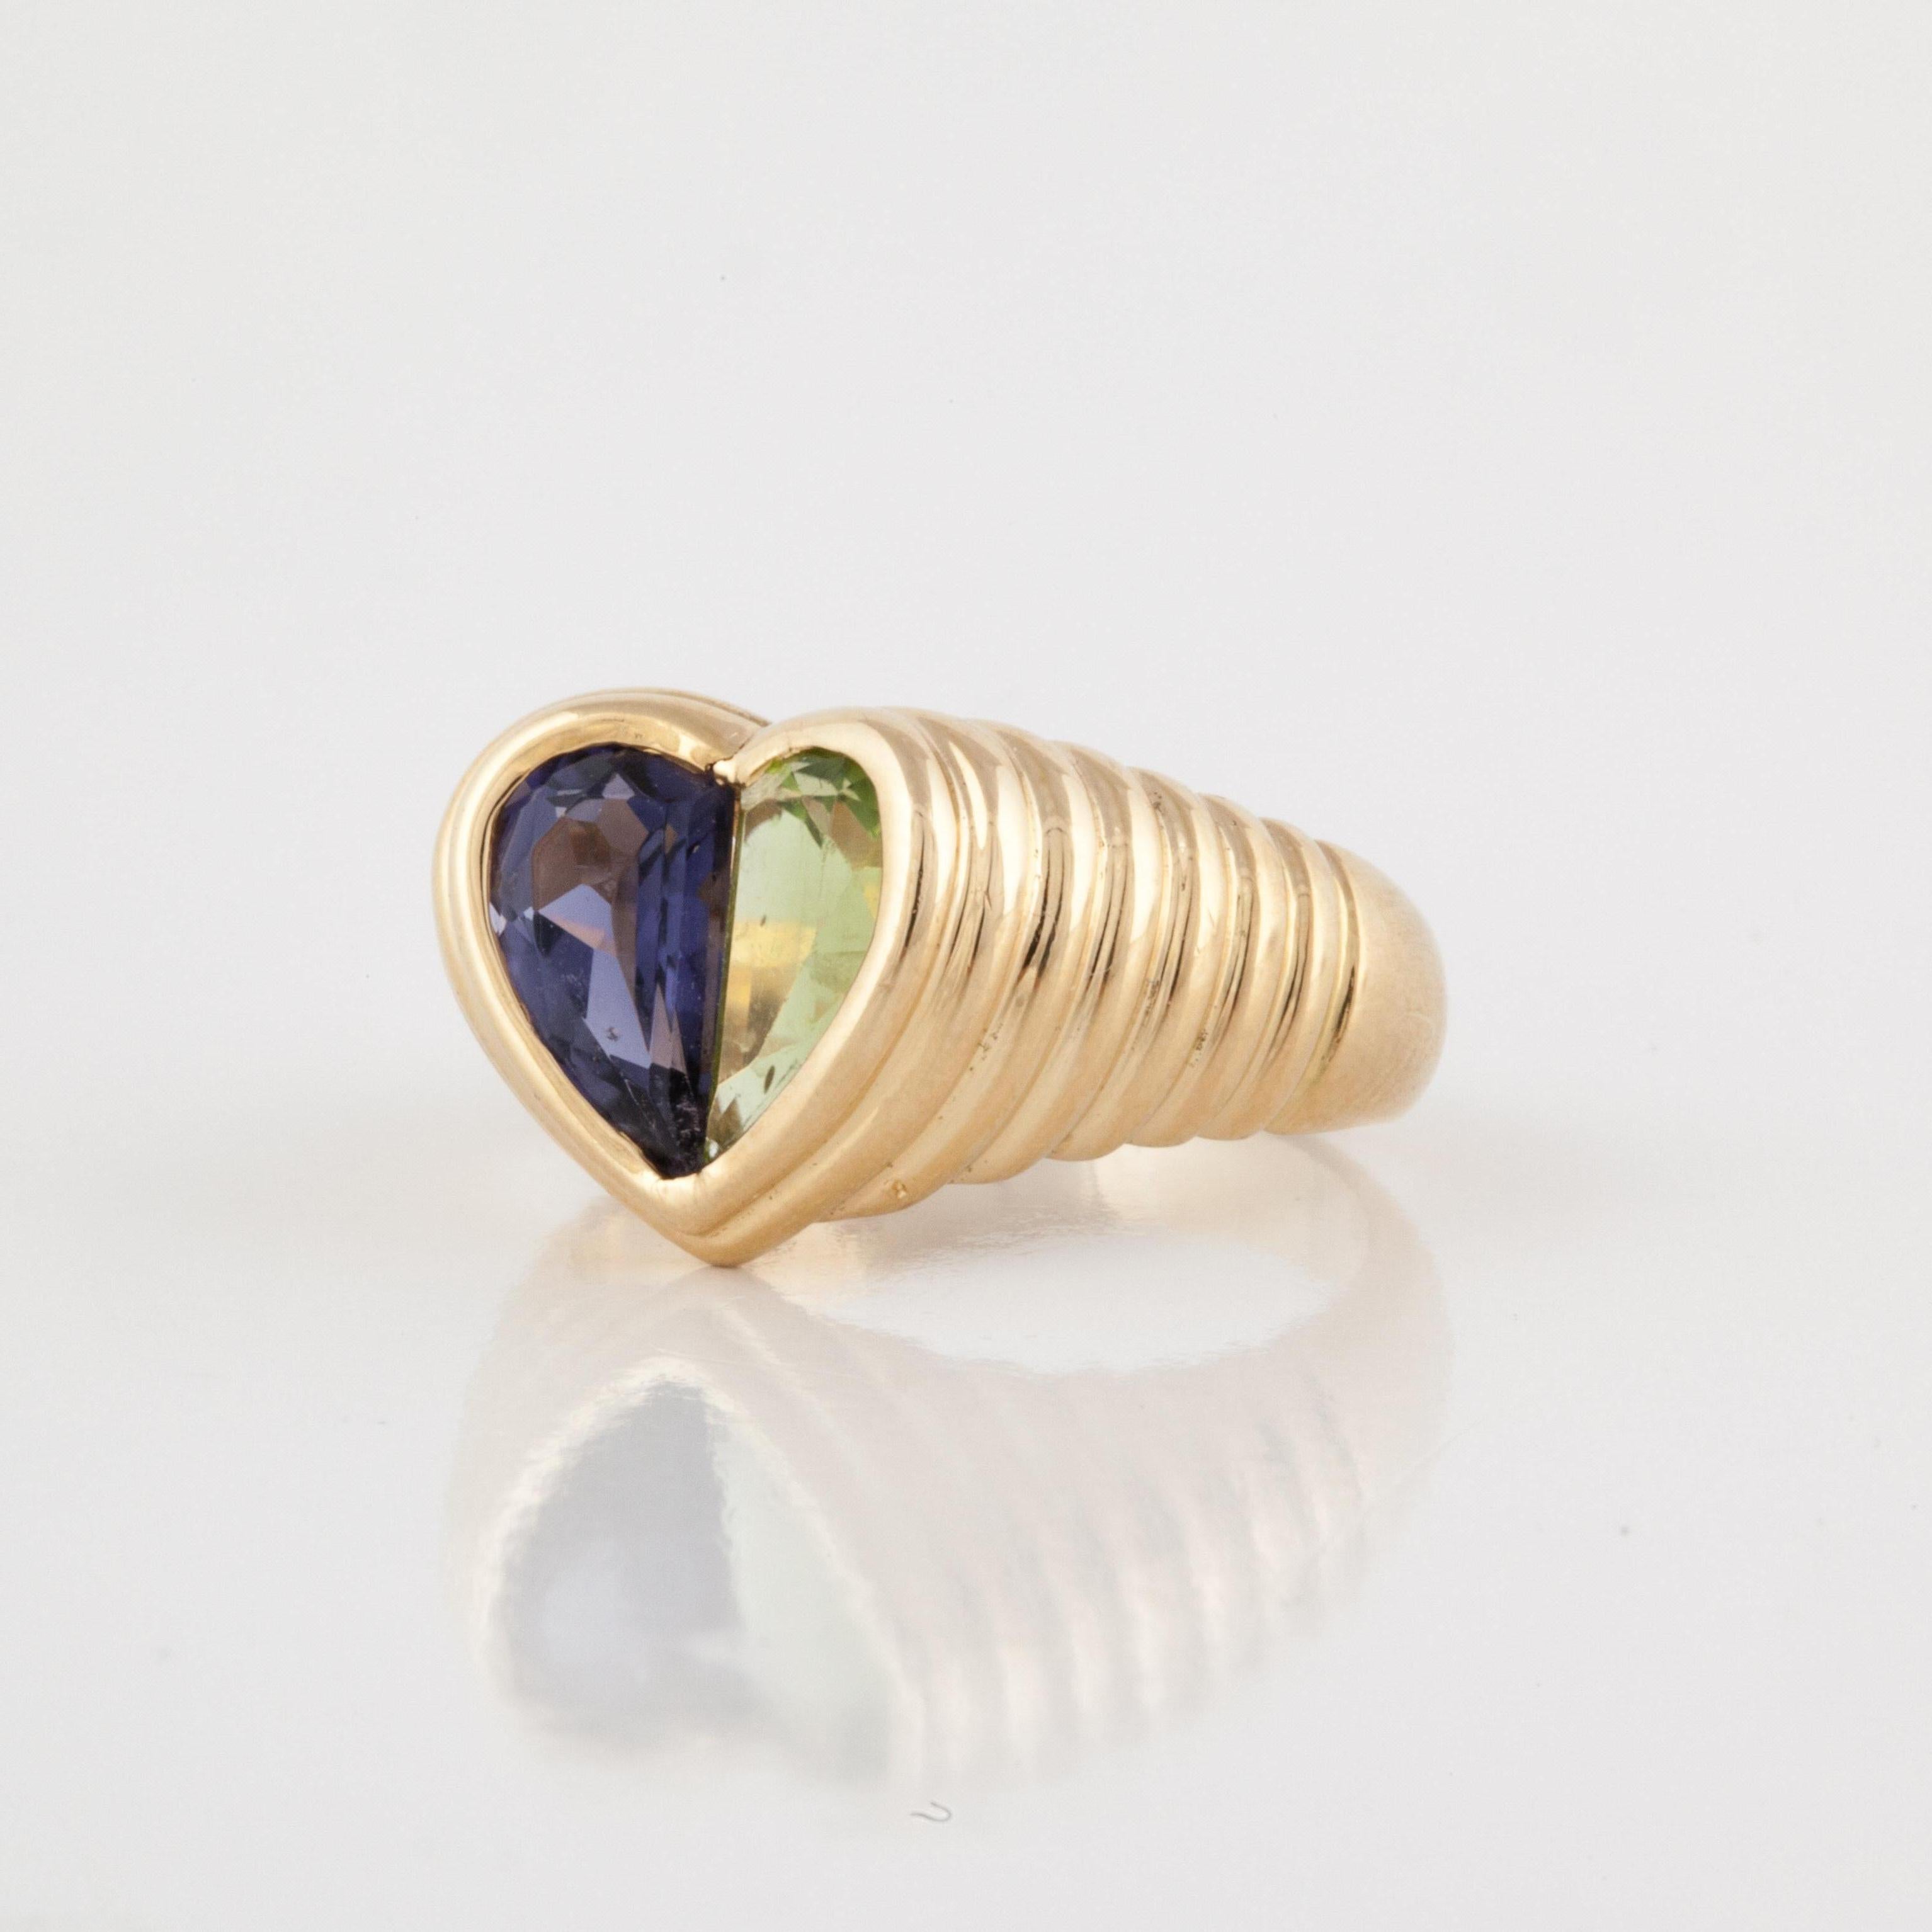 18K yellow gold ring by Bulgari.  It features a peridot and an iolite to form the heart in the center of a ridged shank.  Ring is currently a size 6.  Measures 1/2 an inch x 1/2 an inch.